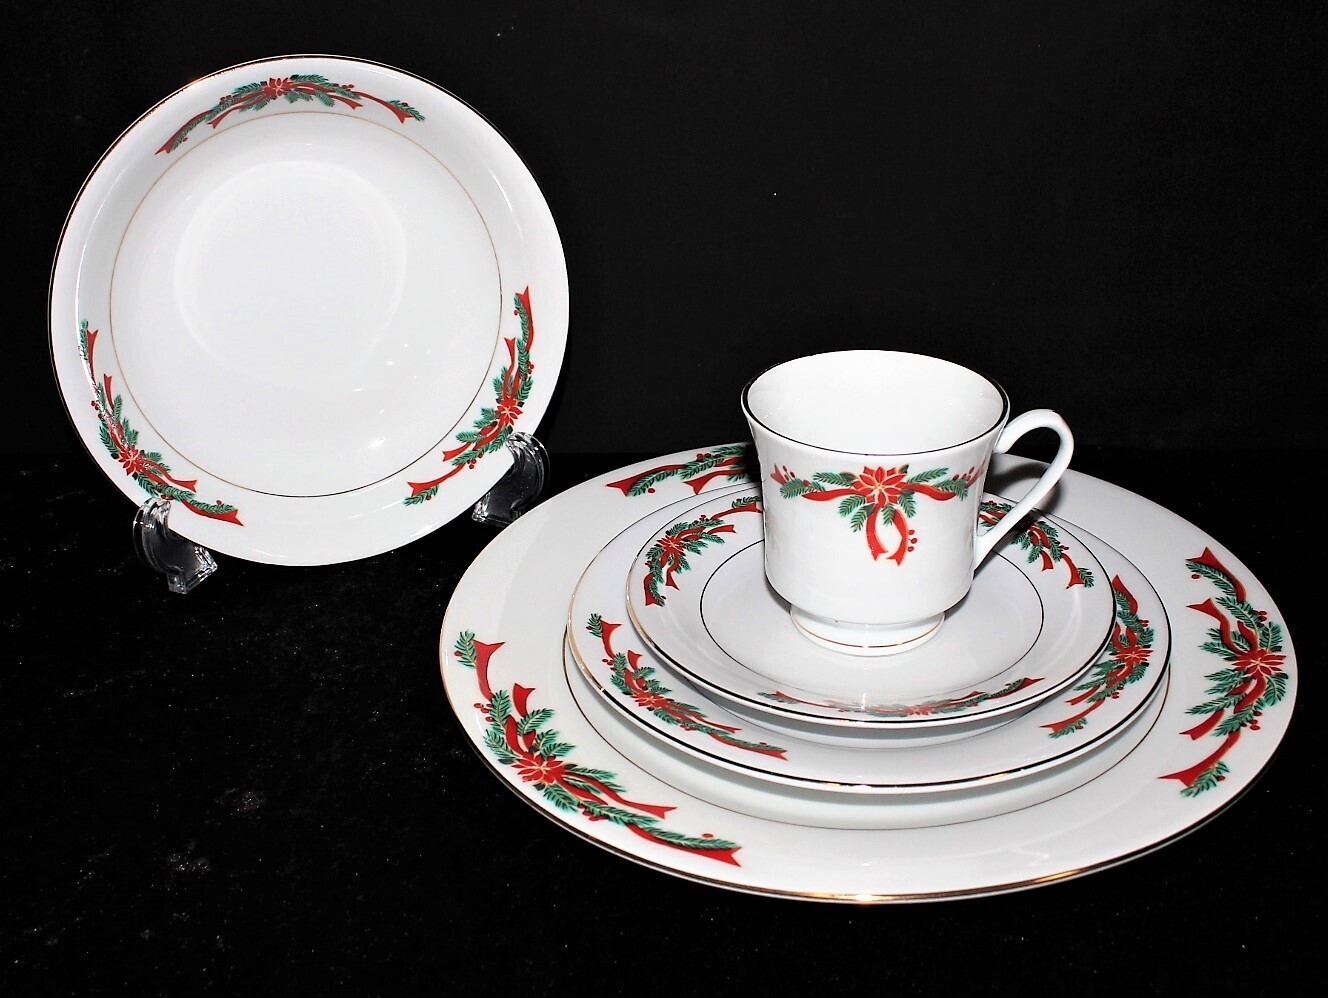 Poinsettia and Ribbons Holiday 5-Piece Place Setting Christmas Fine China